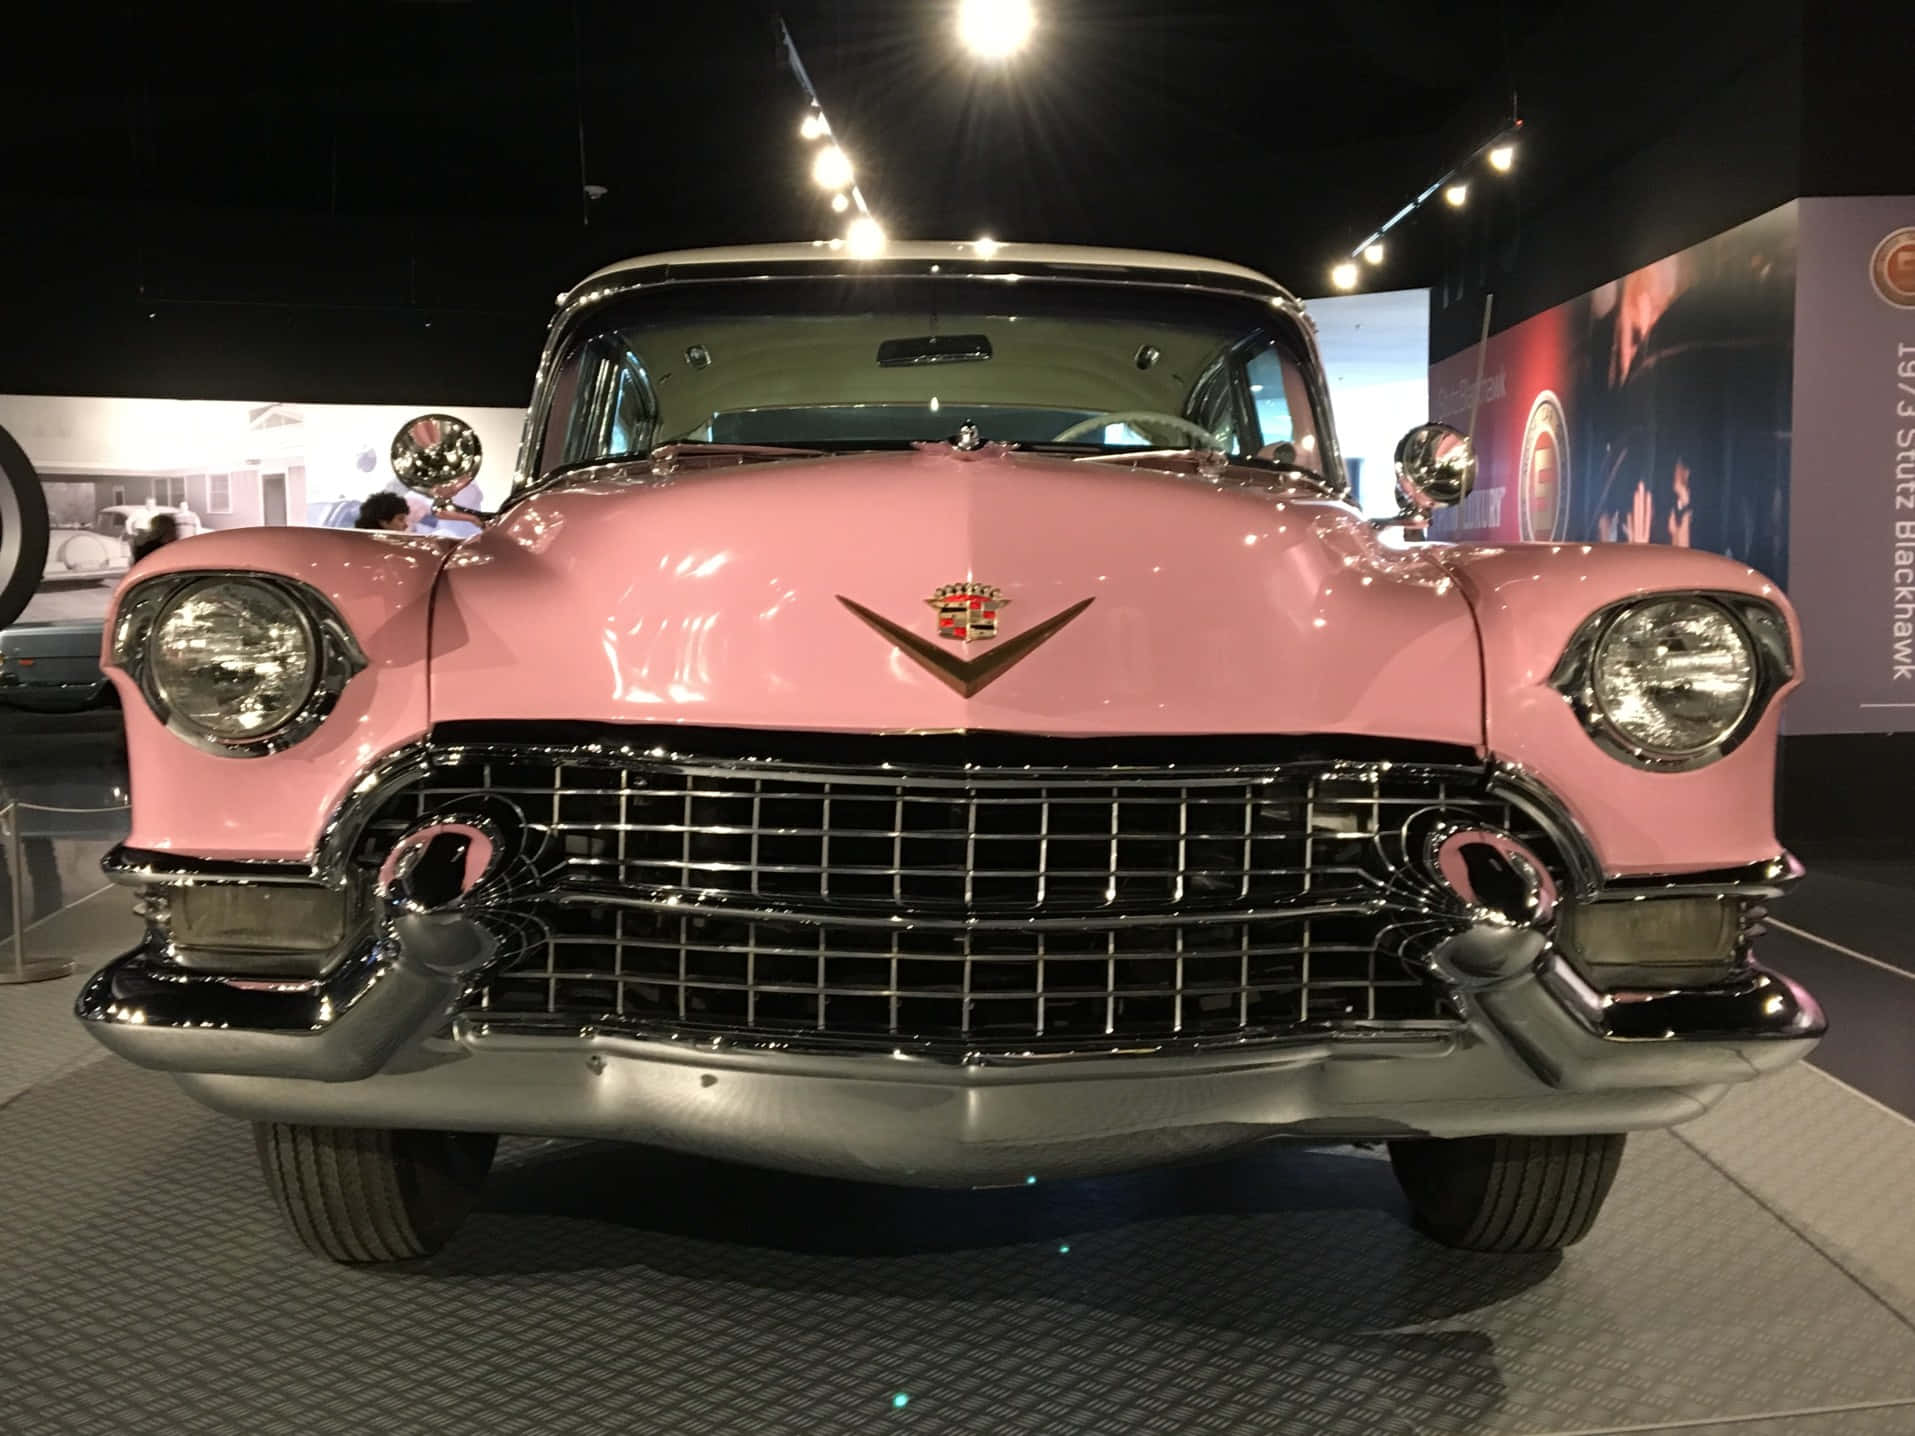 Classic Pink Cadillac cruising in style Wallpaper